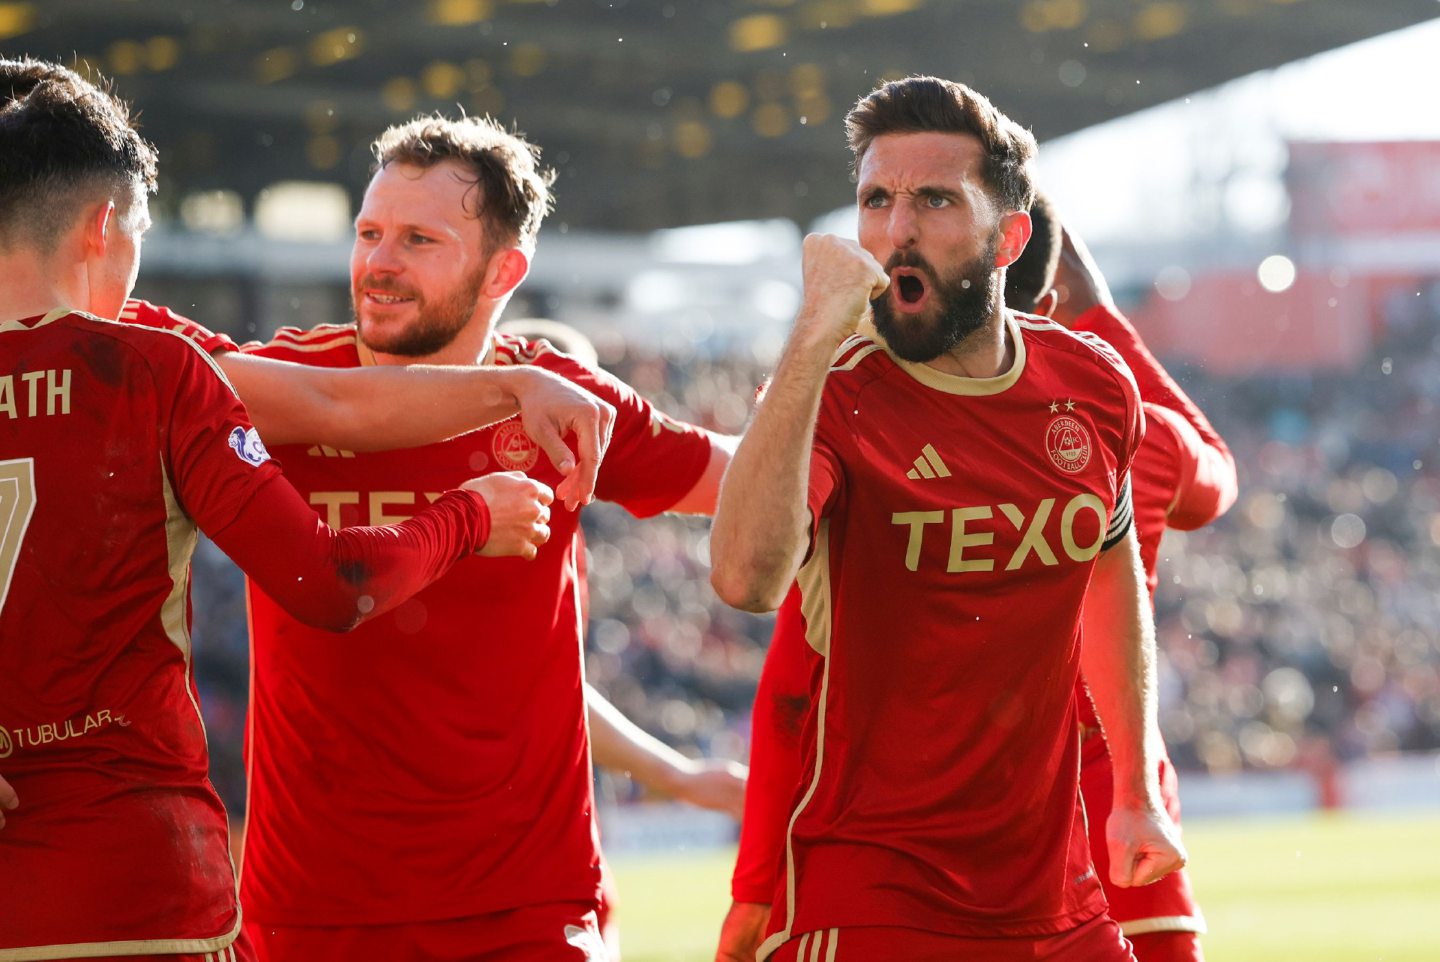 Aberdeen captain Greame Shinnie celebrates going 2-1 up against Ross County. Image: Shutterstock